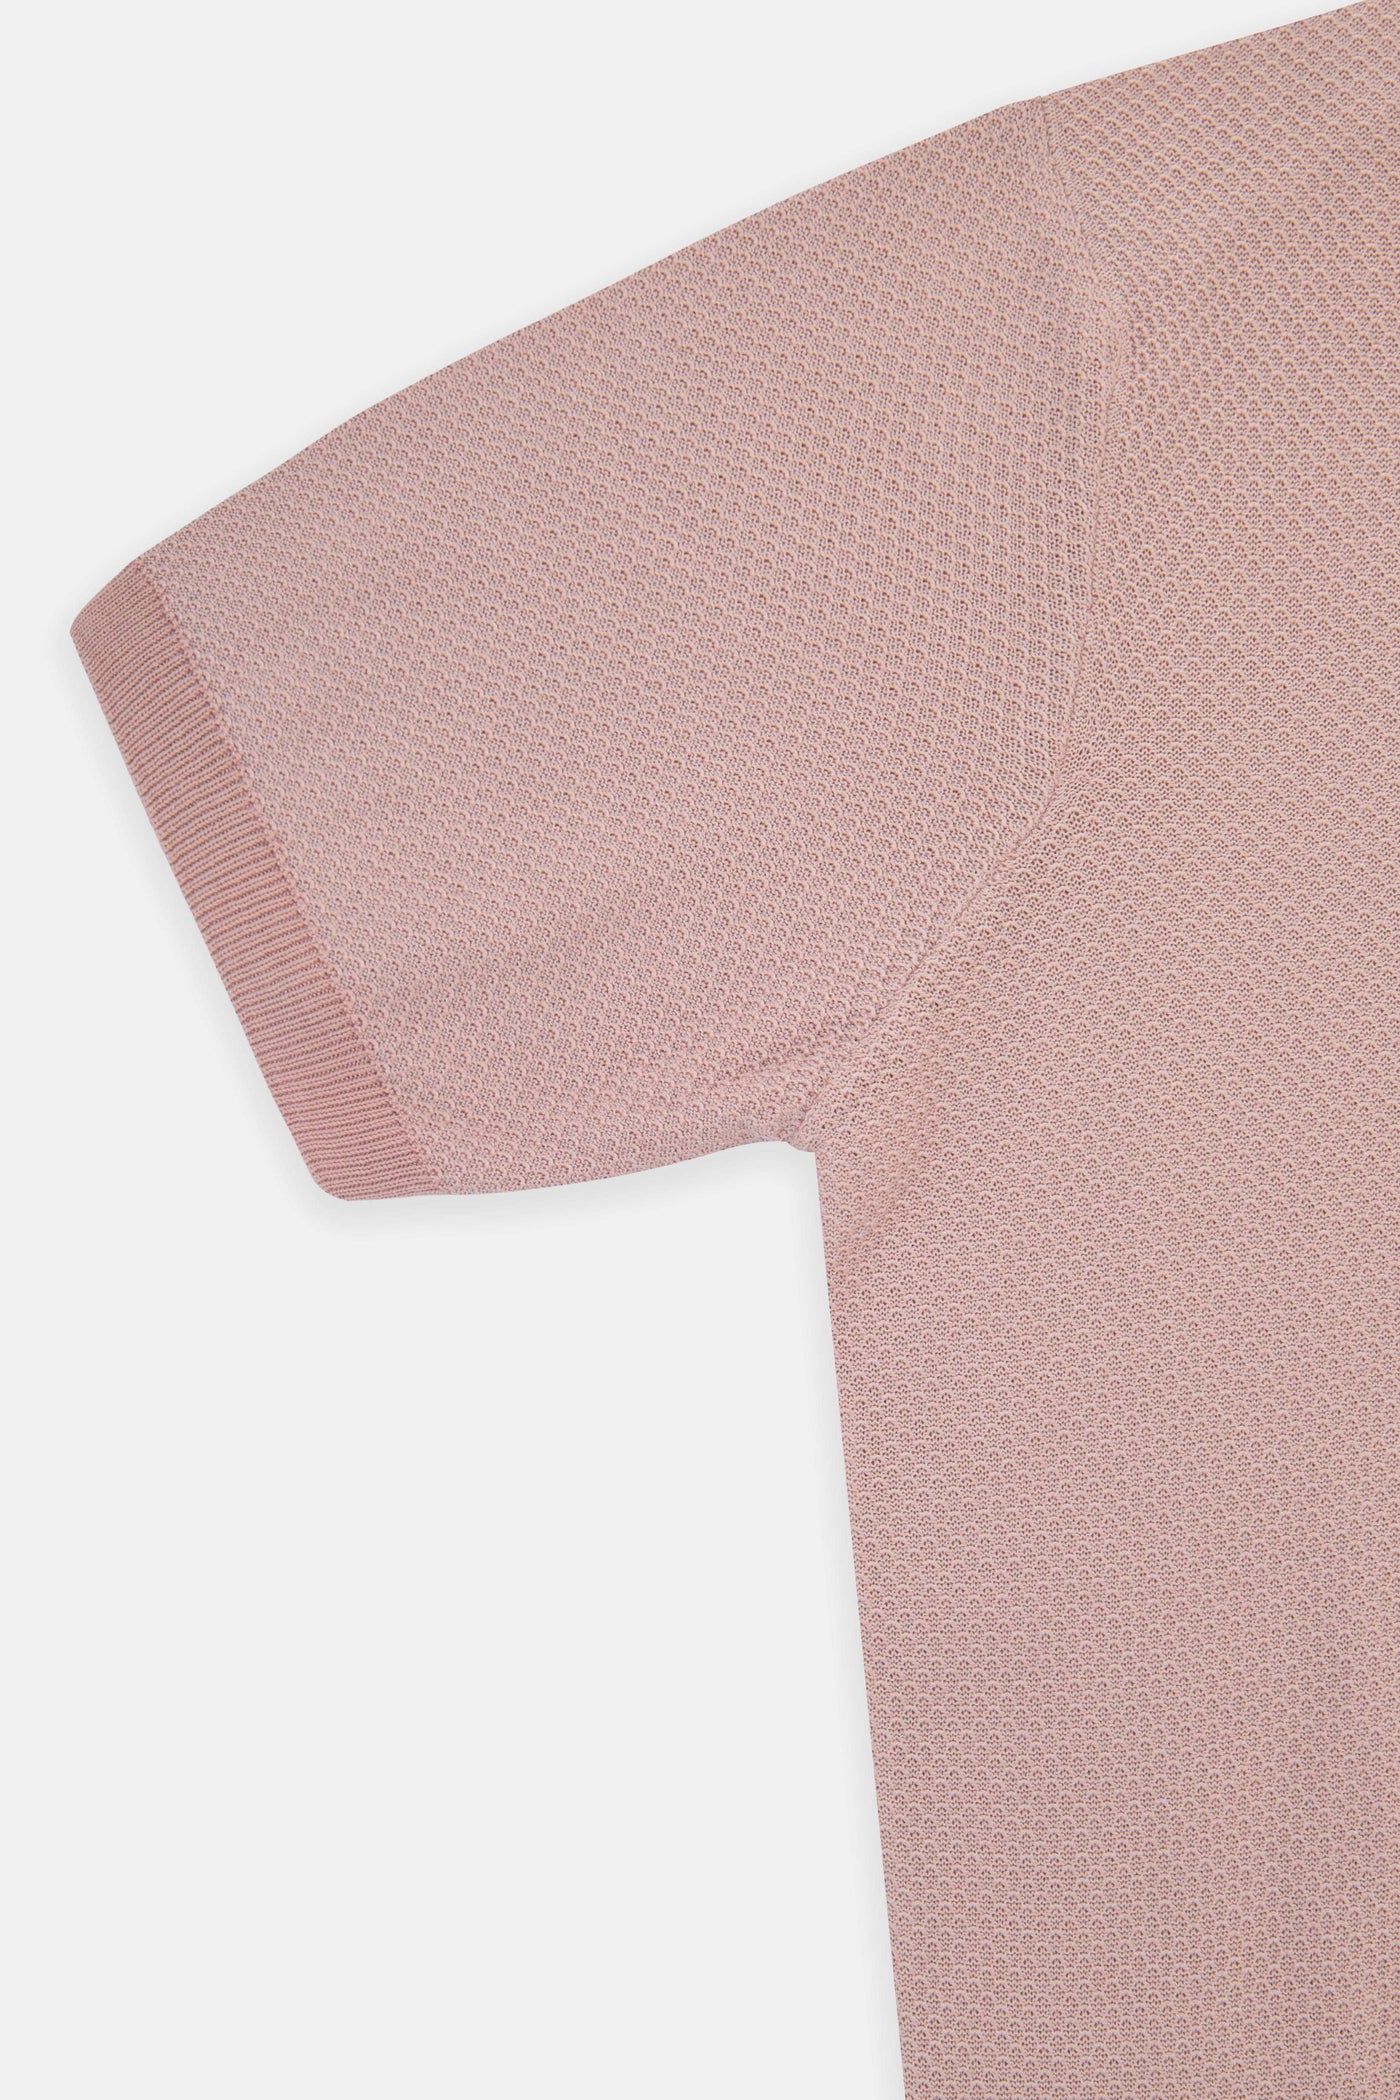 Jacquard Knitted Rosy Brown Polo